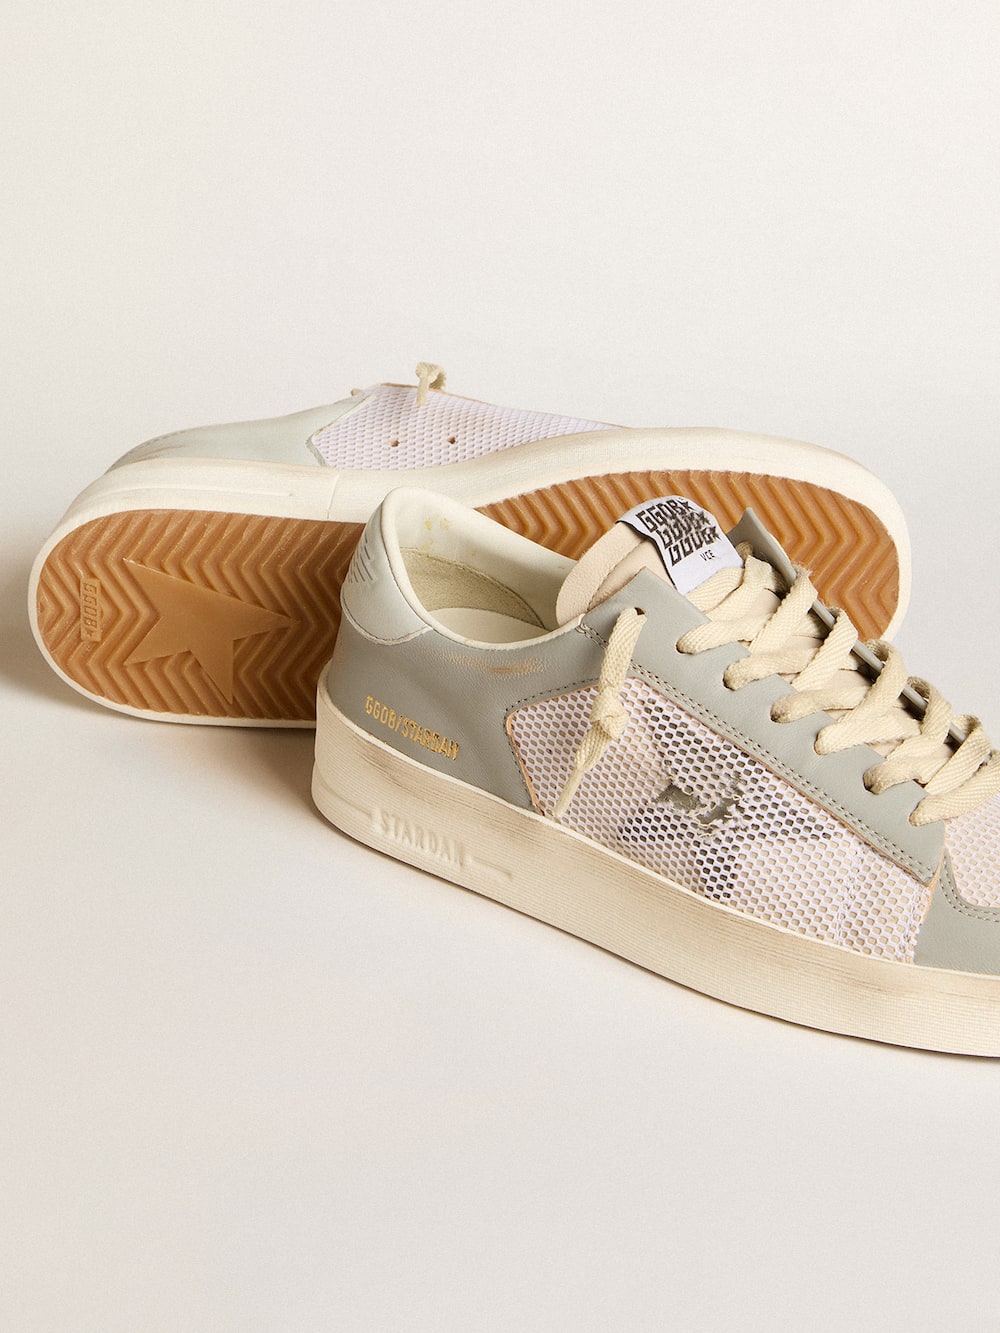 Golden Goose - Stardan in gray nappa leather and white mesh with gray leather star in 